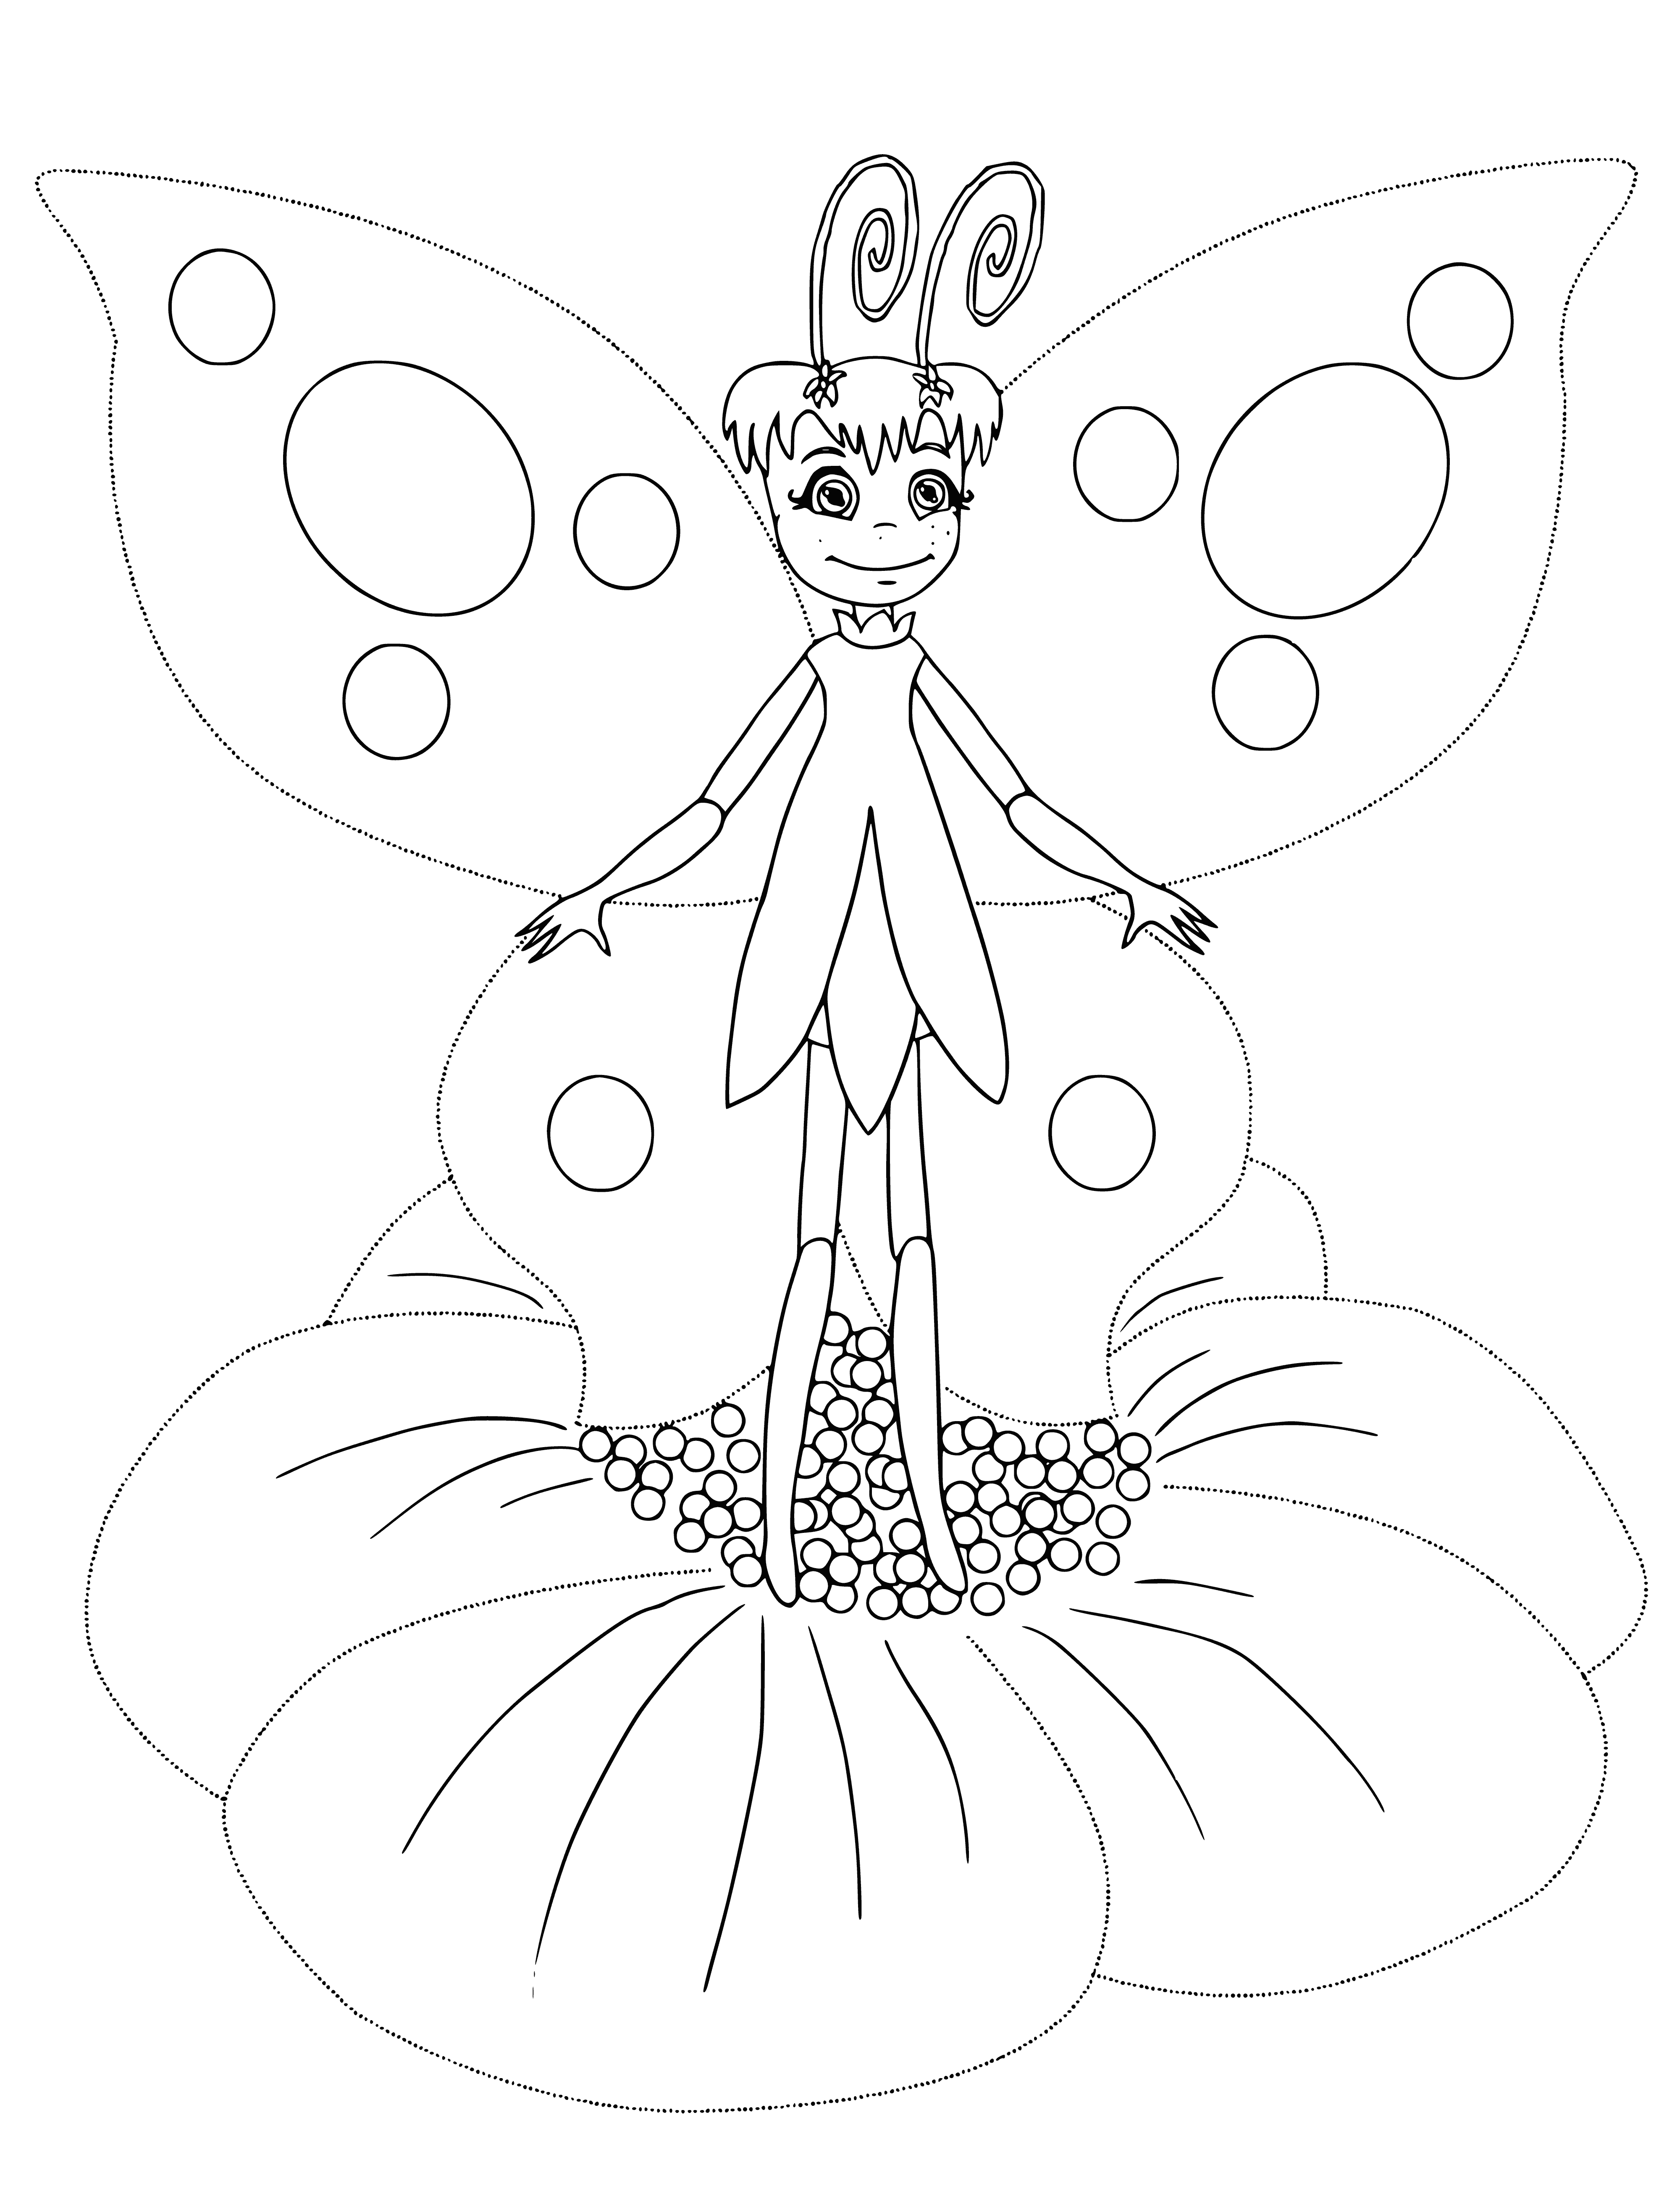 coloring page: Luntik and his friend Butterfly fly around a big flower, both smiling with bright eyes and outstretched hands.